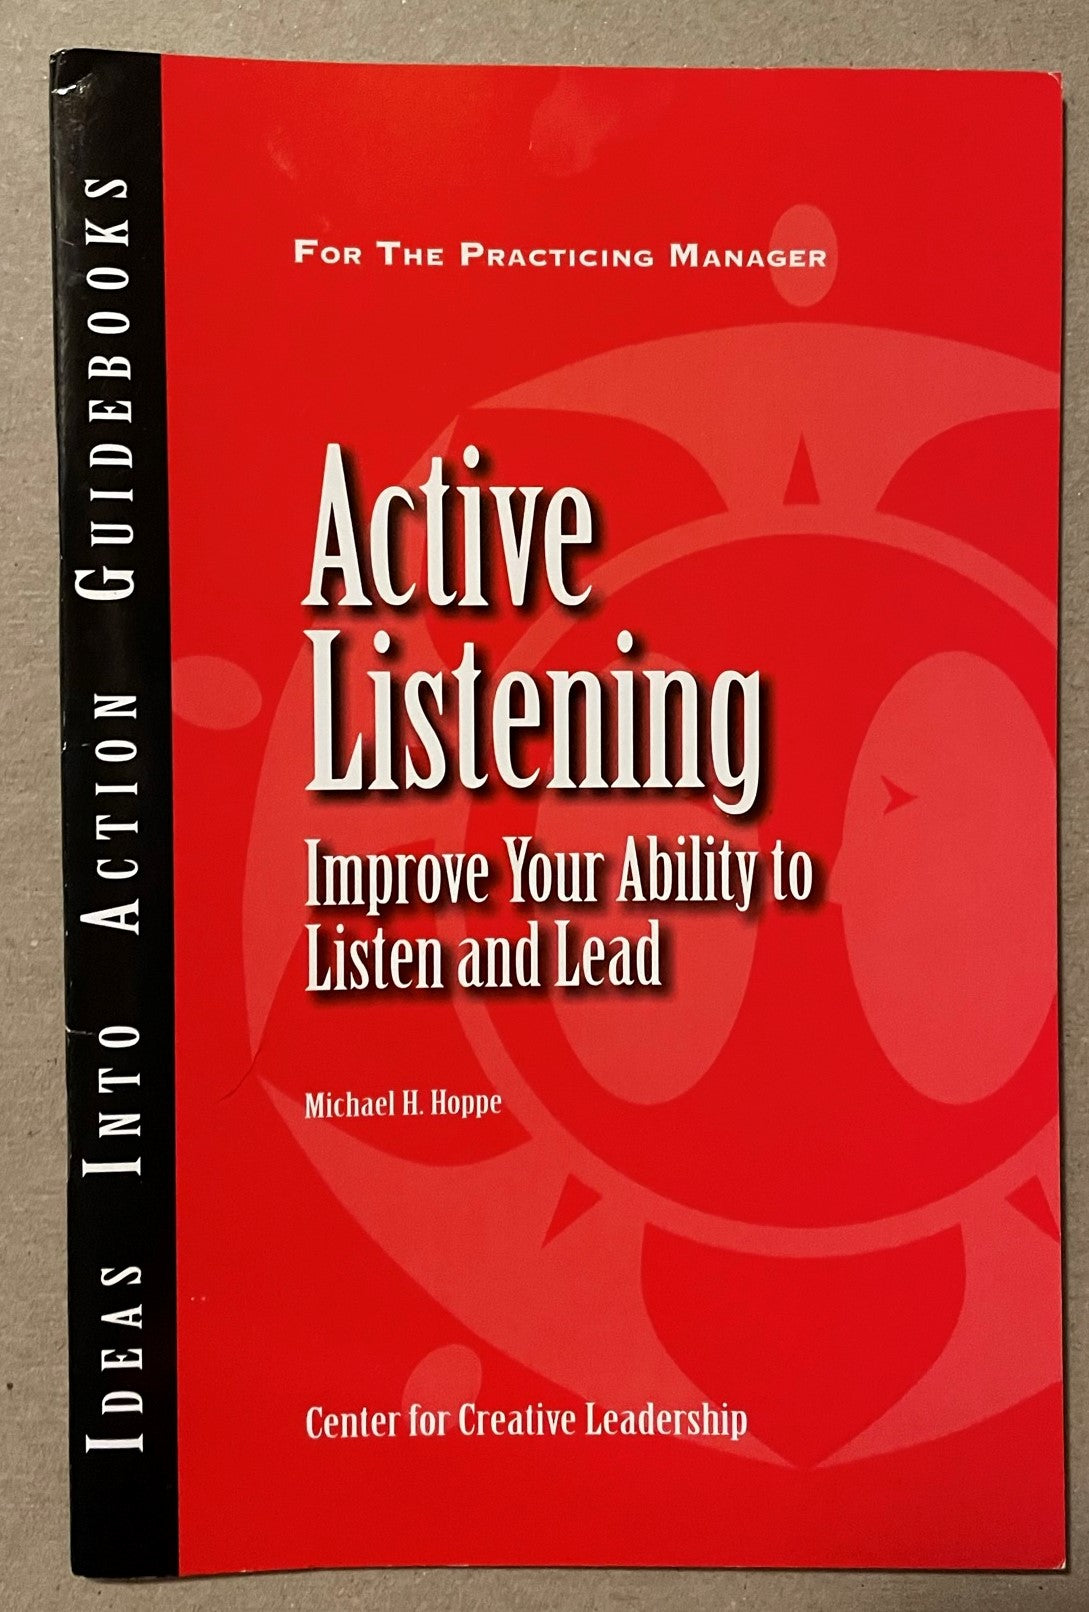 Hoppe, Michael: Active Listening - Improve Your Ability to Listen and Lead (2007)